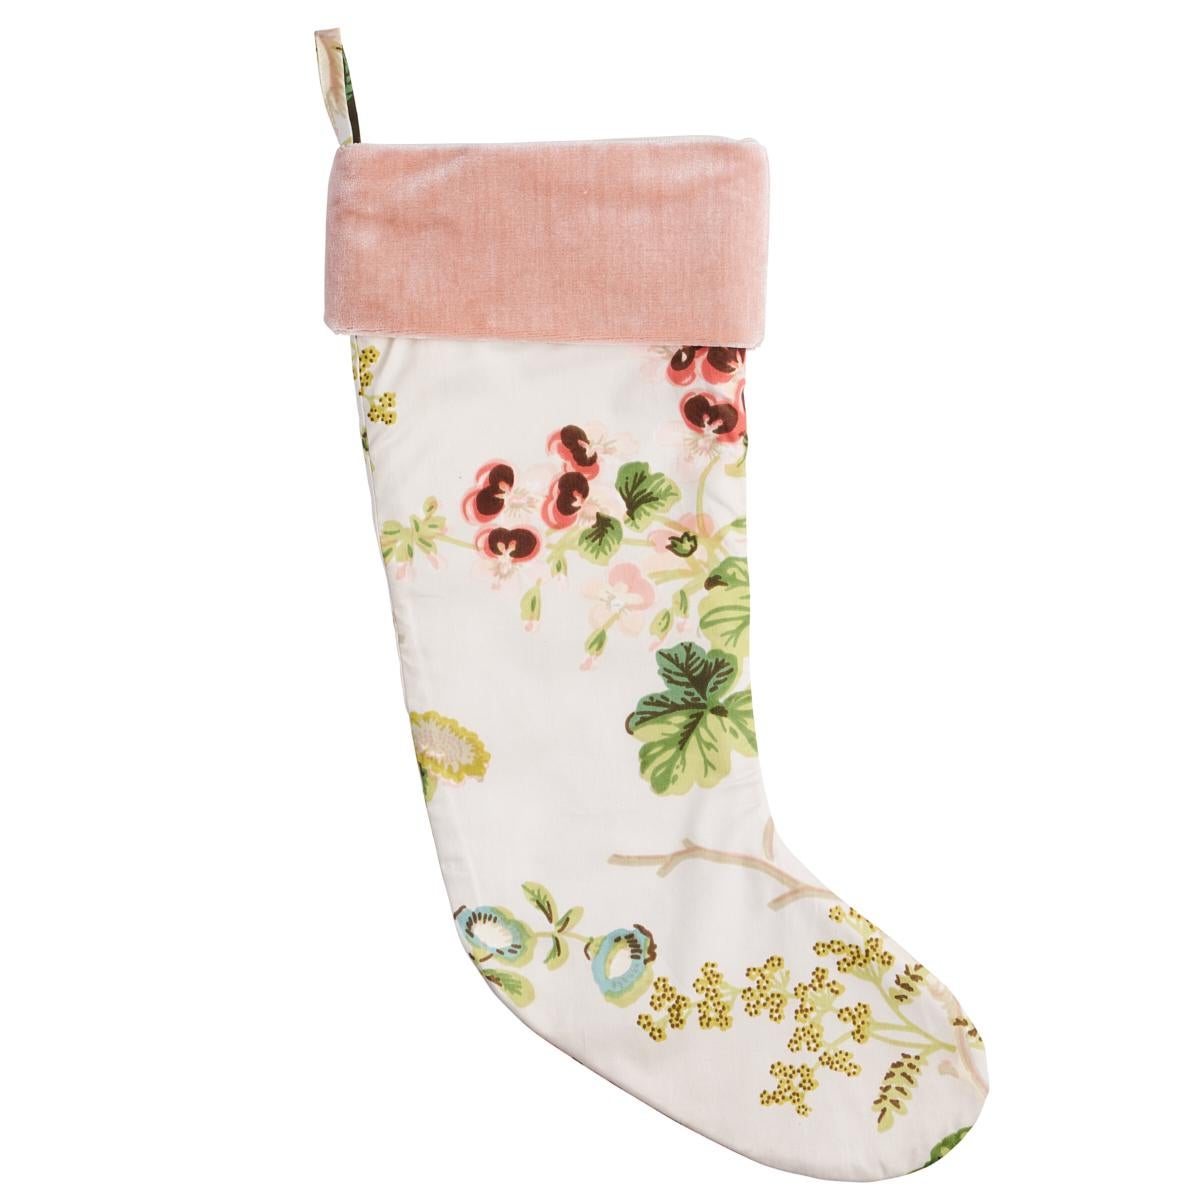 Fashioned out of our Salisbury Chintz with a lush silk velvet cuff, this limited-edition holiday stocking feels soft and romantic in the best possible way. The florals are hand-printed with no less than 12 colors for a gorgeously layered effect, and